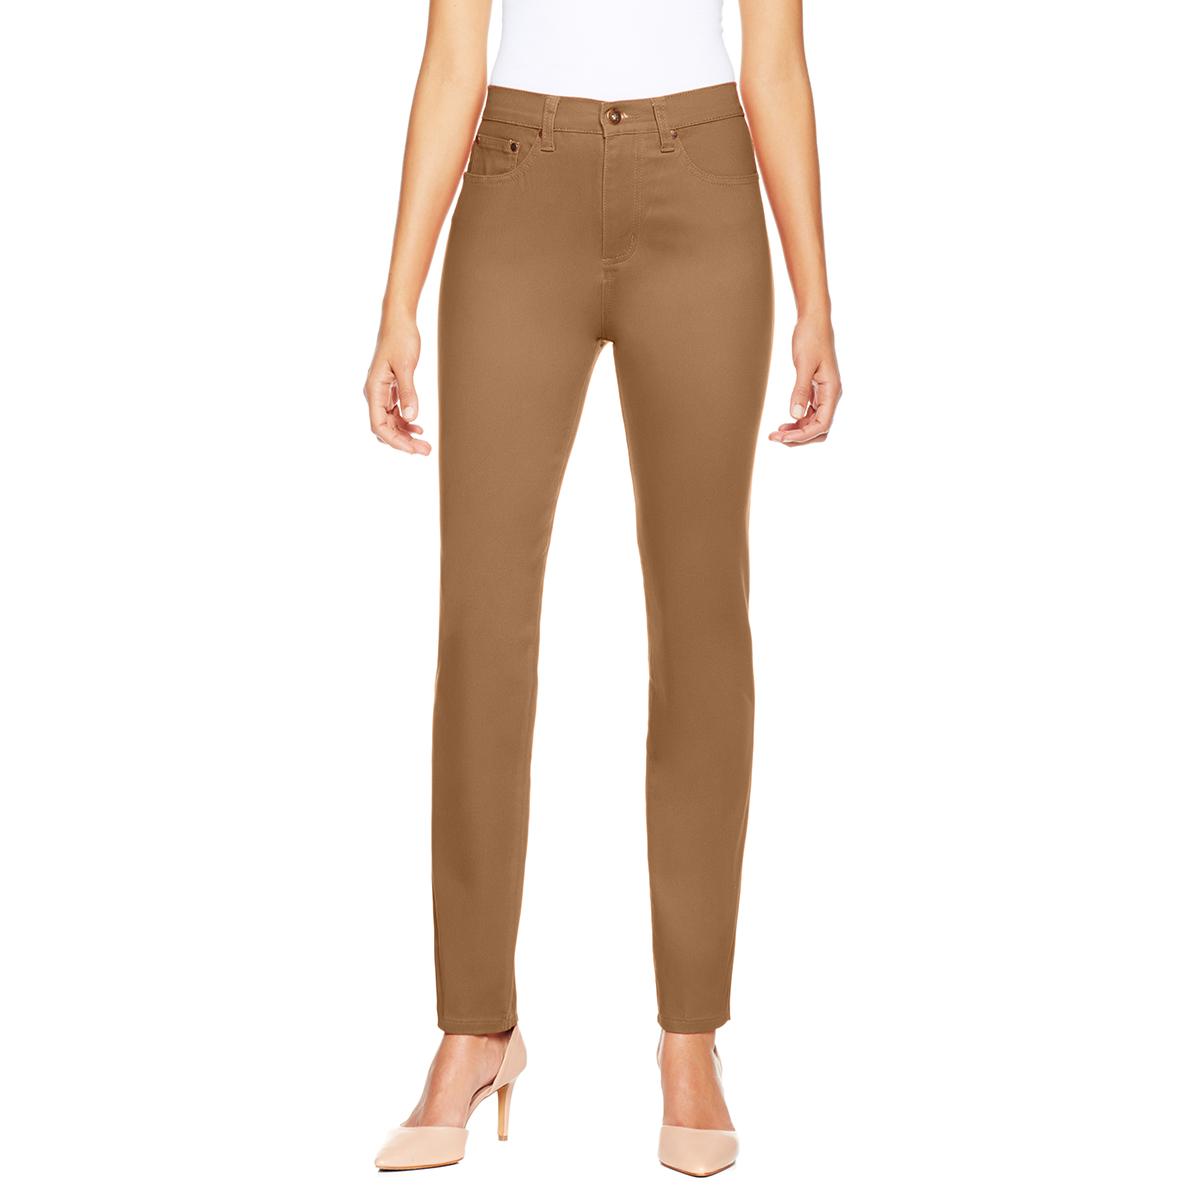 DG2 Diane Gilman Brown Stretch Pants with Wide Waist Band